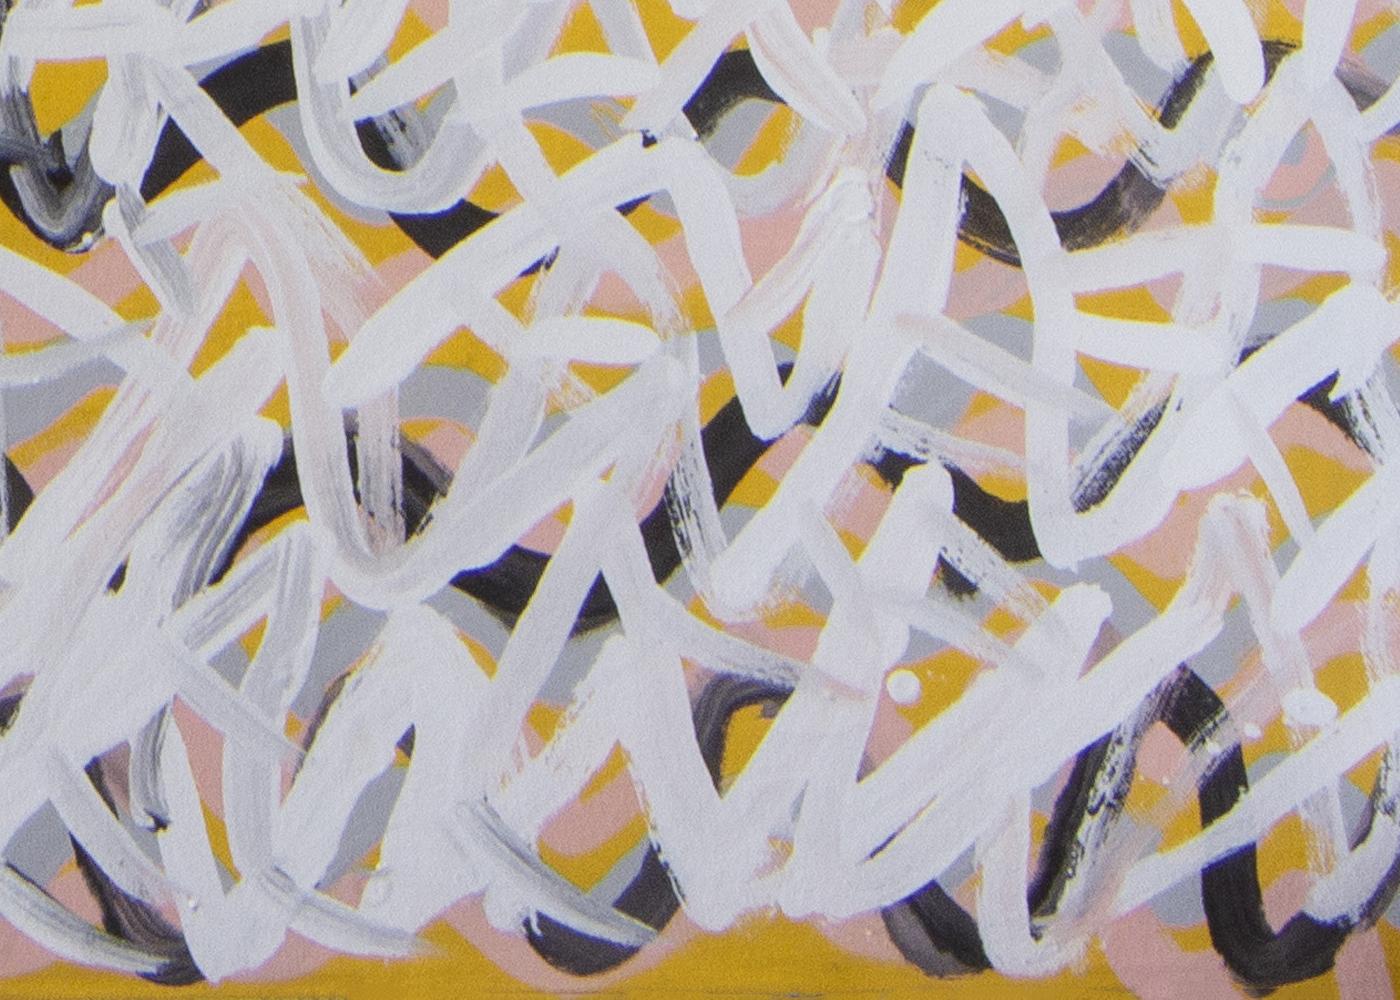 Milkwater - Sturt Creek, abstract painting in yellow, pink, white, black. - Abstract Expressionist Painting by Kittey Malarvie